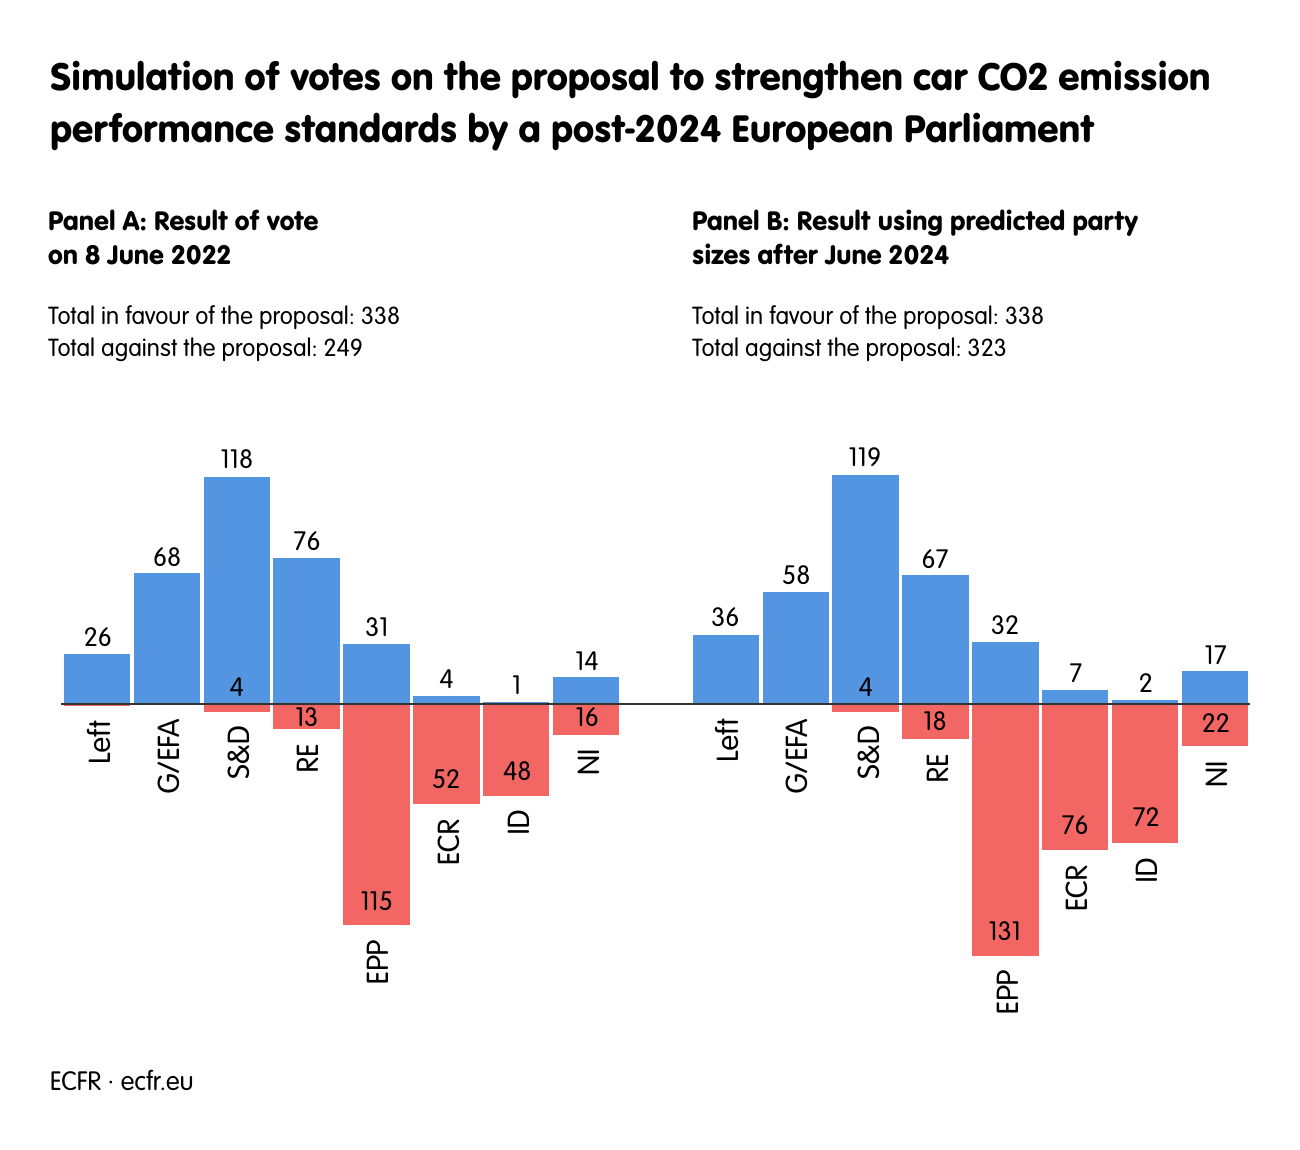 Simulation of votes on the proposal to strengthen car CO2 emission performance standards by a post-2024 European Parliament